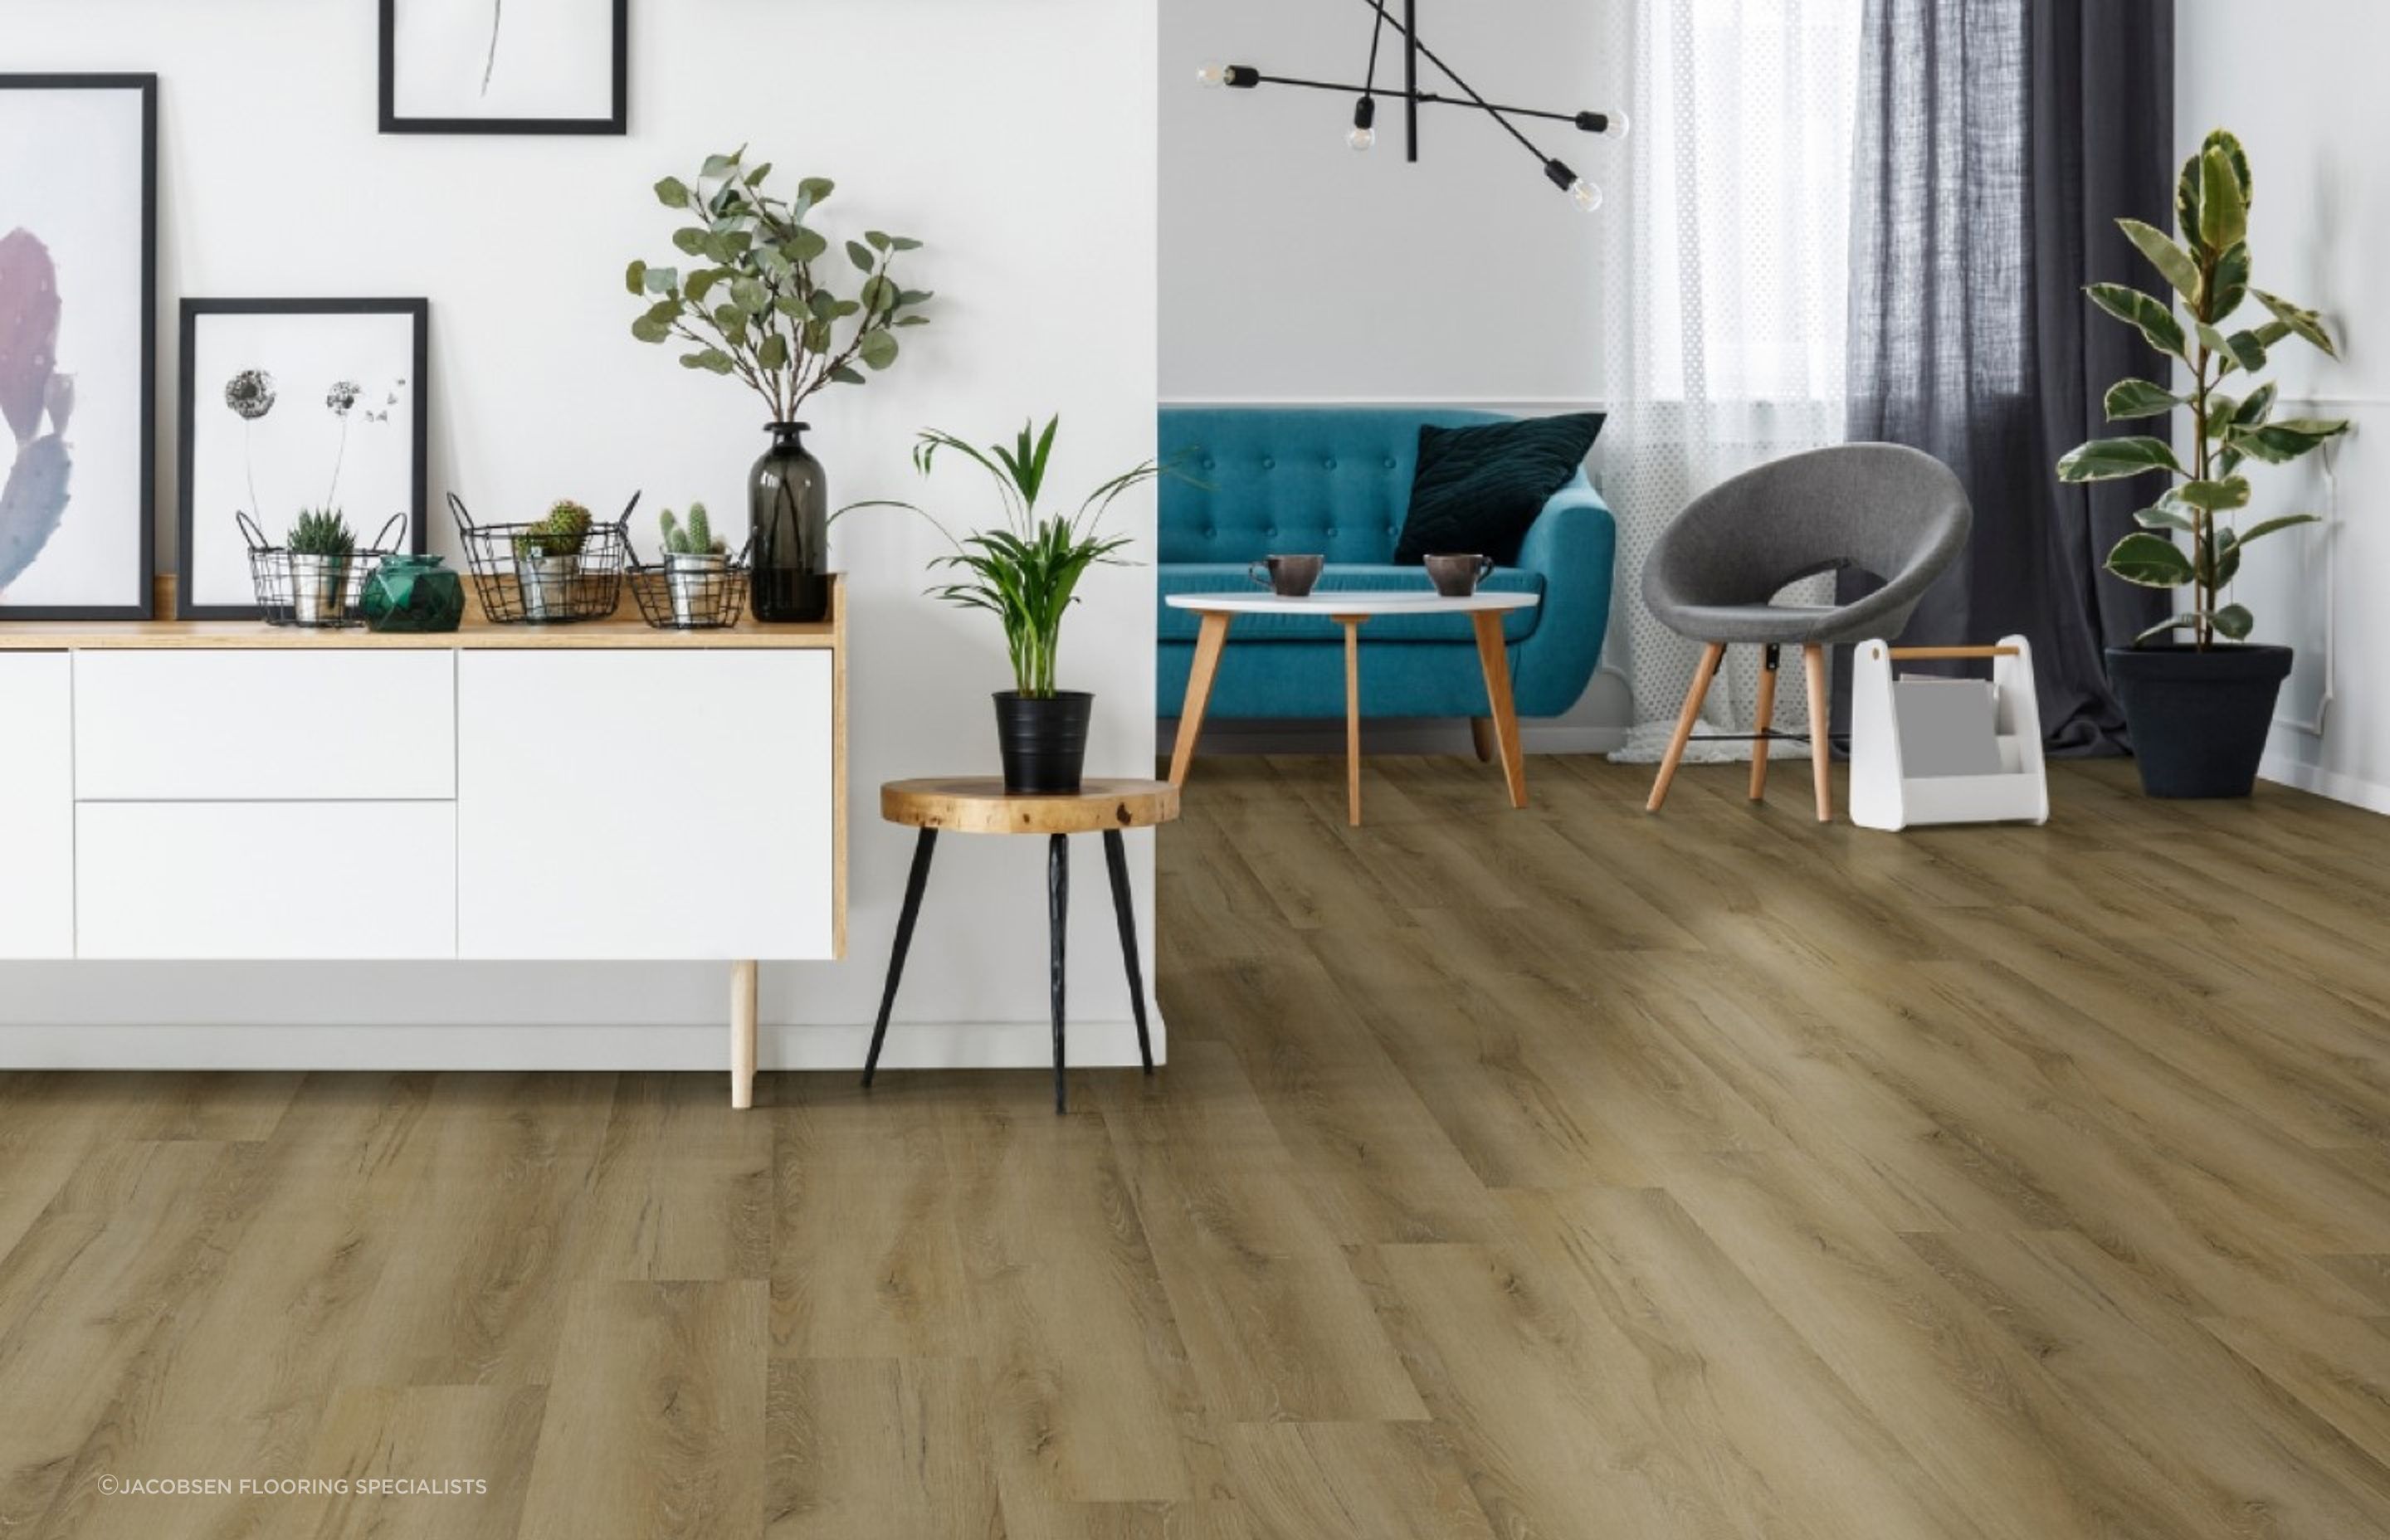 The Audacity Laminate Flooring showcases a wonderful example of a Embossed in Register (EIR) finish.